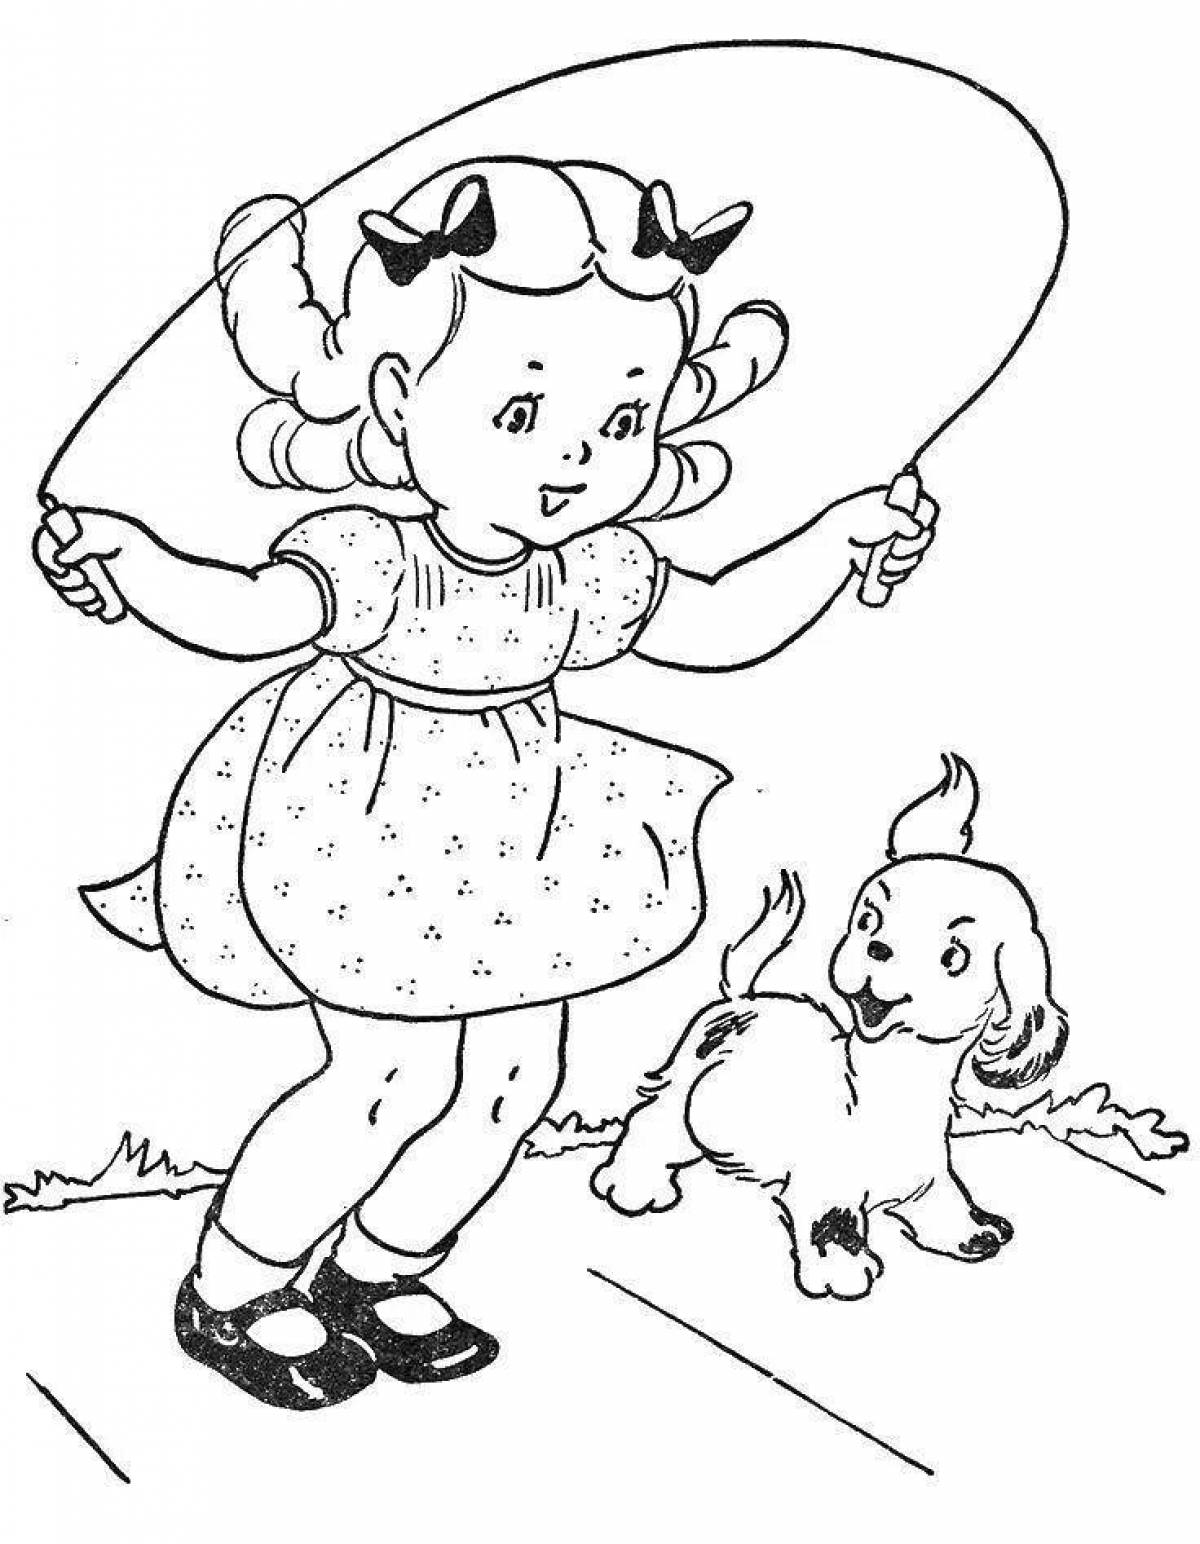 Sunny jump rope coloring page